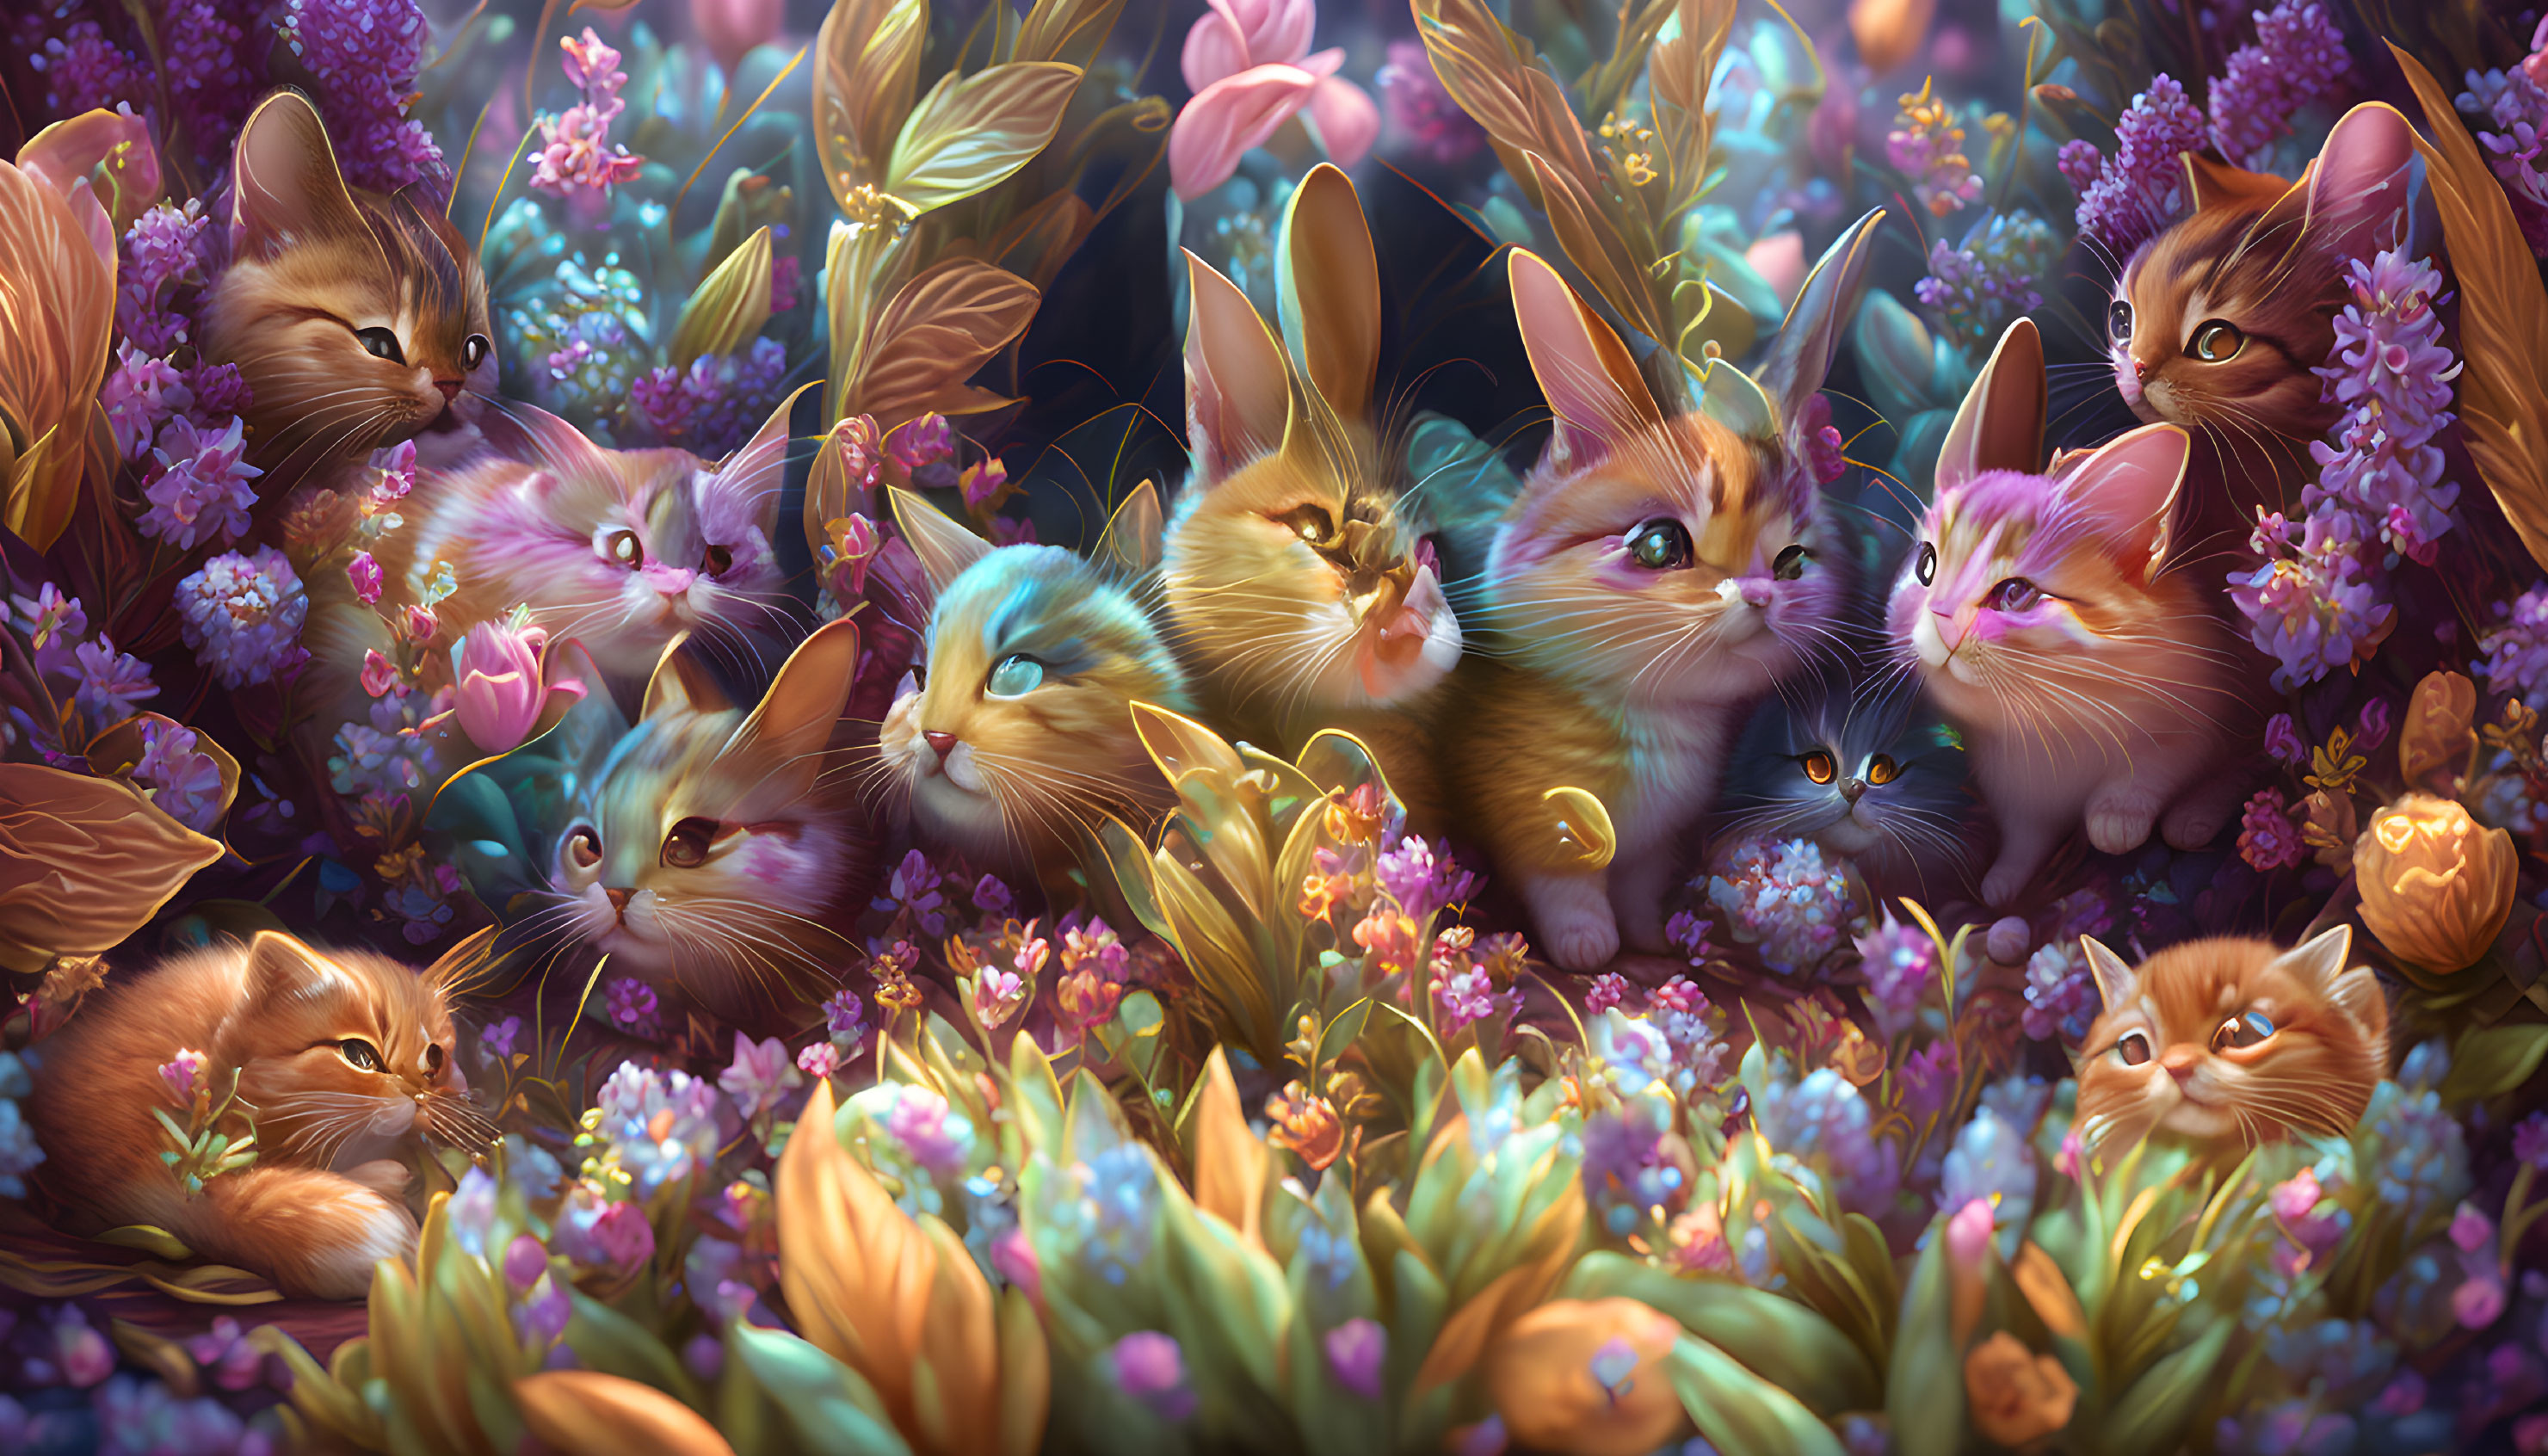 Whimsical cats in vibrant floral scene